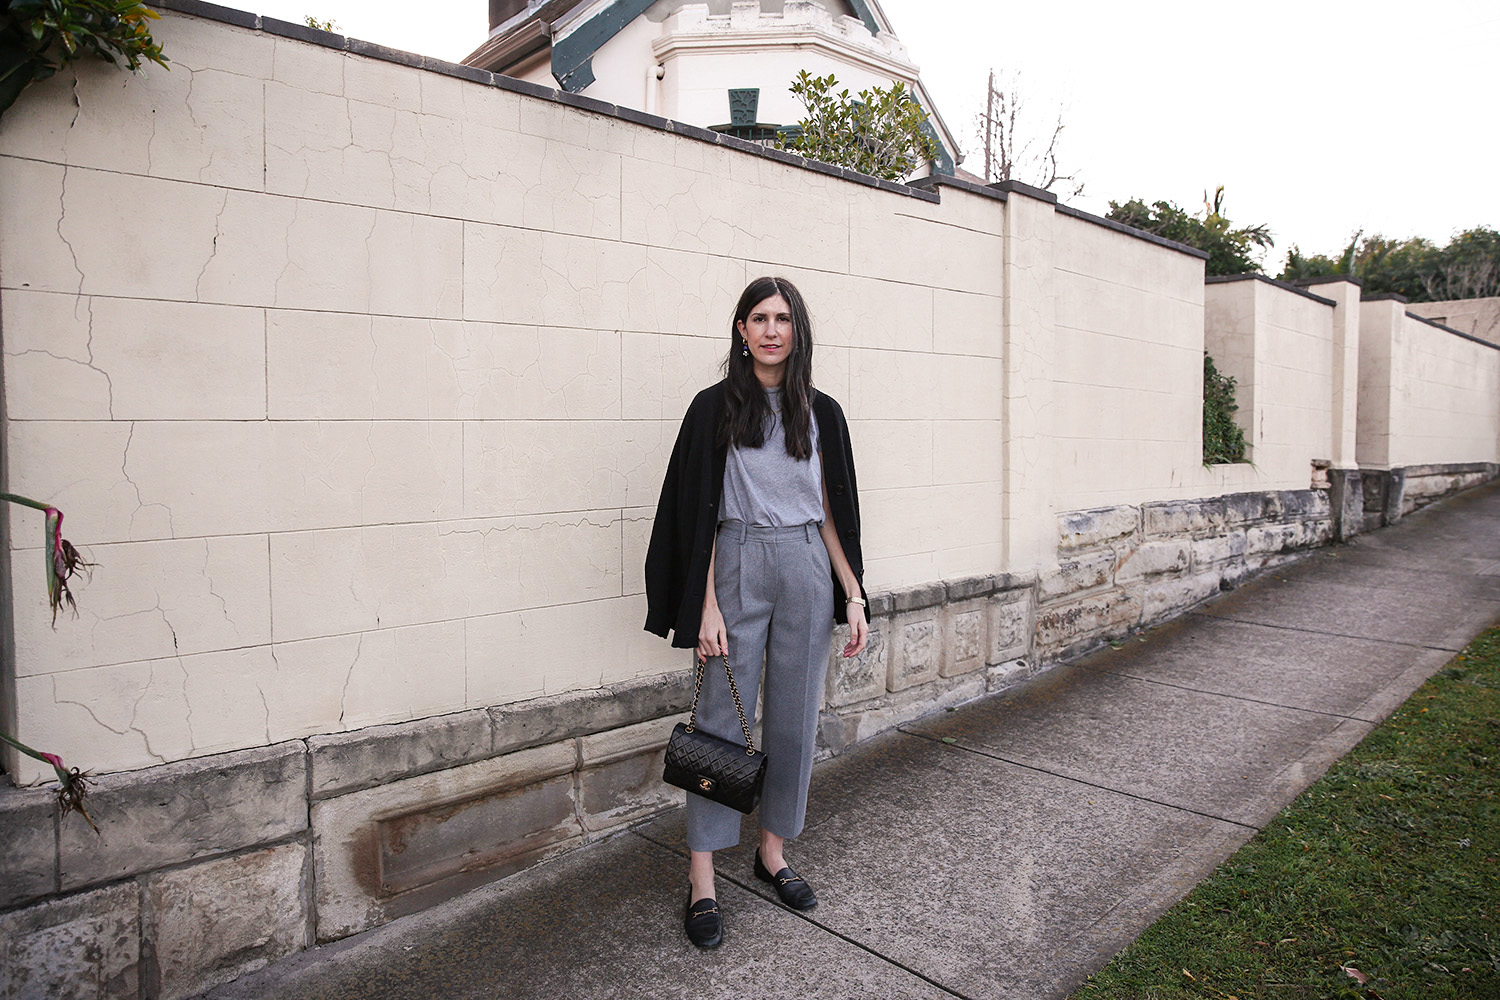 Jamie Lee of Mademoiselle wearing And Other Stories black cardigan and Acne Studios trea trousers